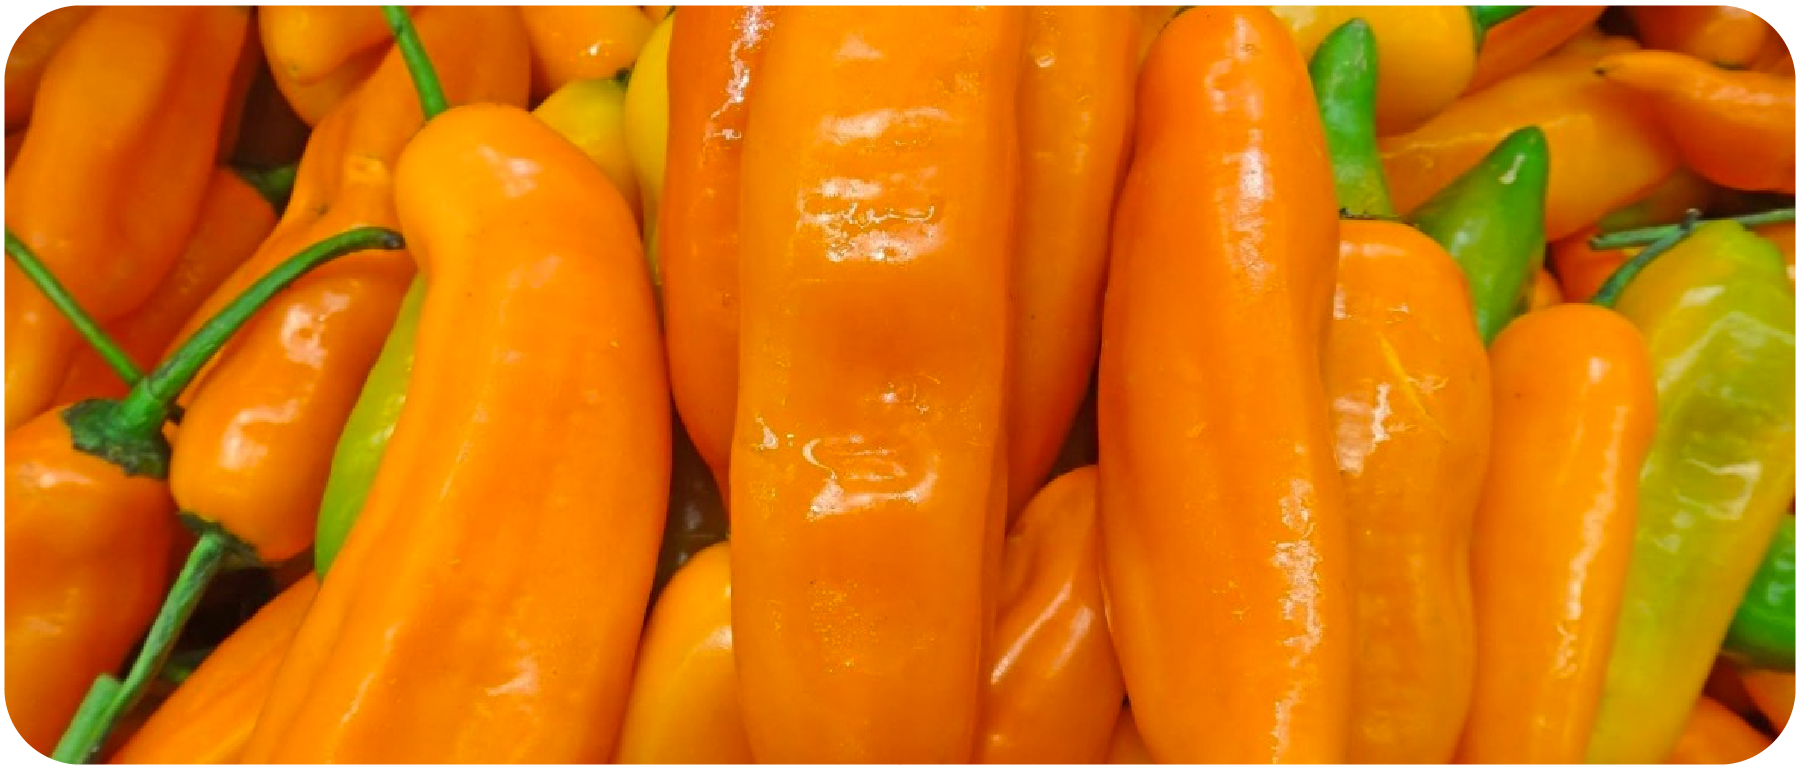 Why the Aji Amarillo is so used in Peruvian Food